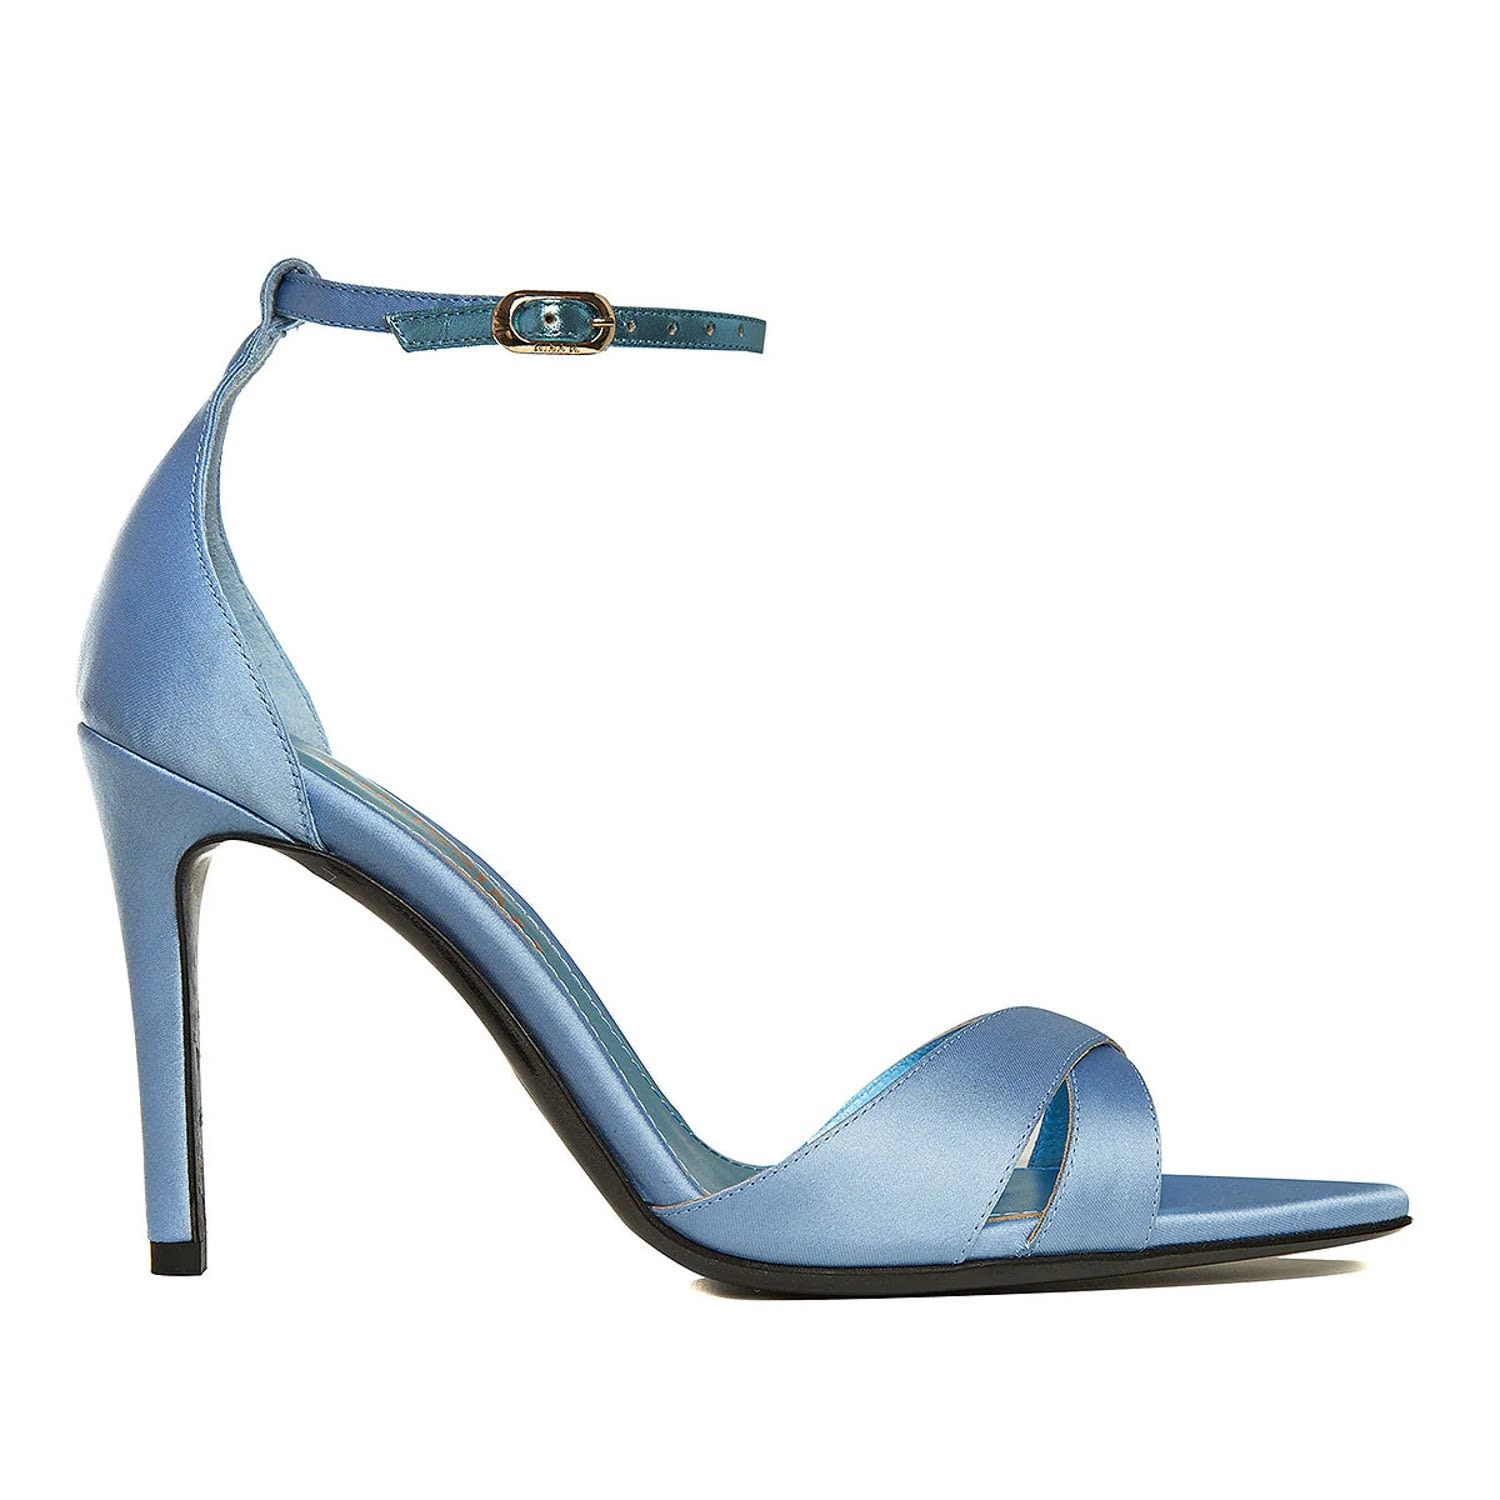 Shop Ginissima Women's Thea Baby Blue Satin Sandals